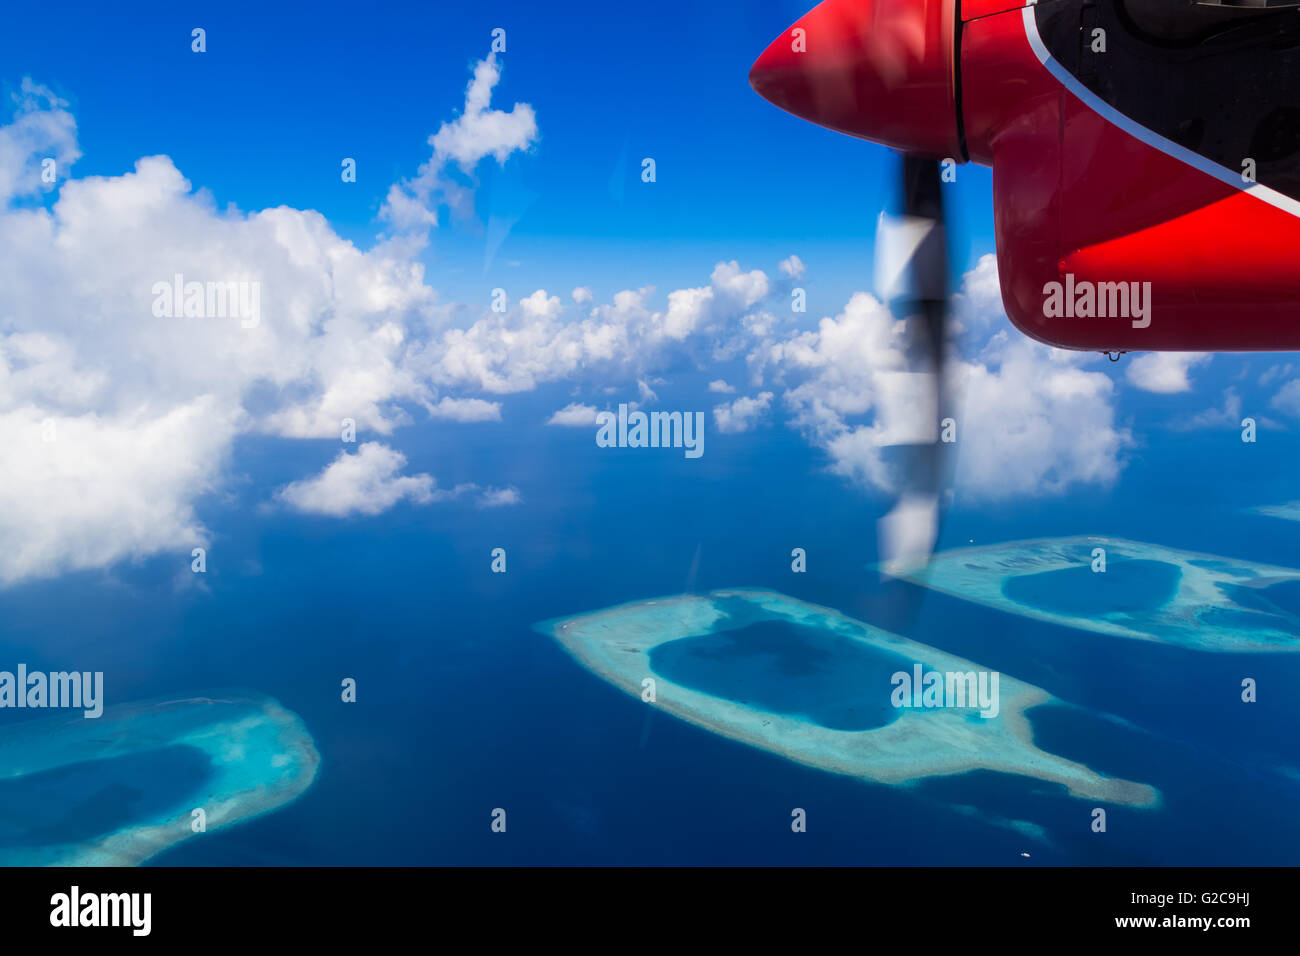 Aerial view from a seaplane on Maldives island Stock Photo